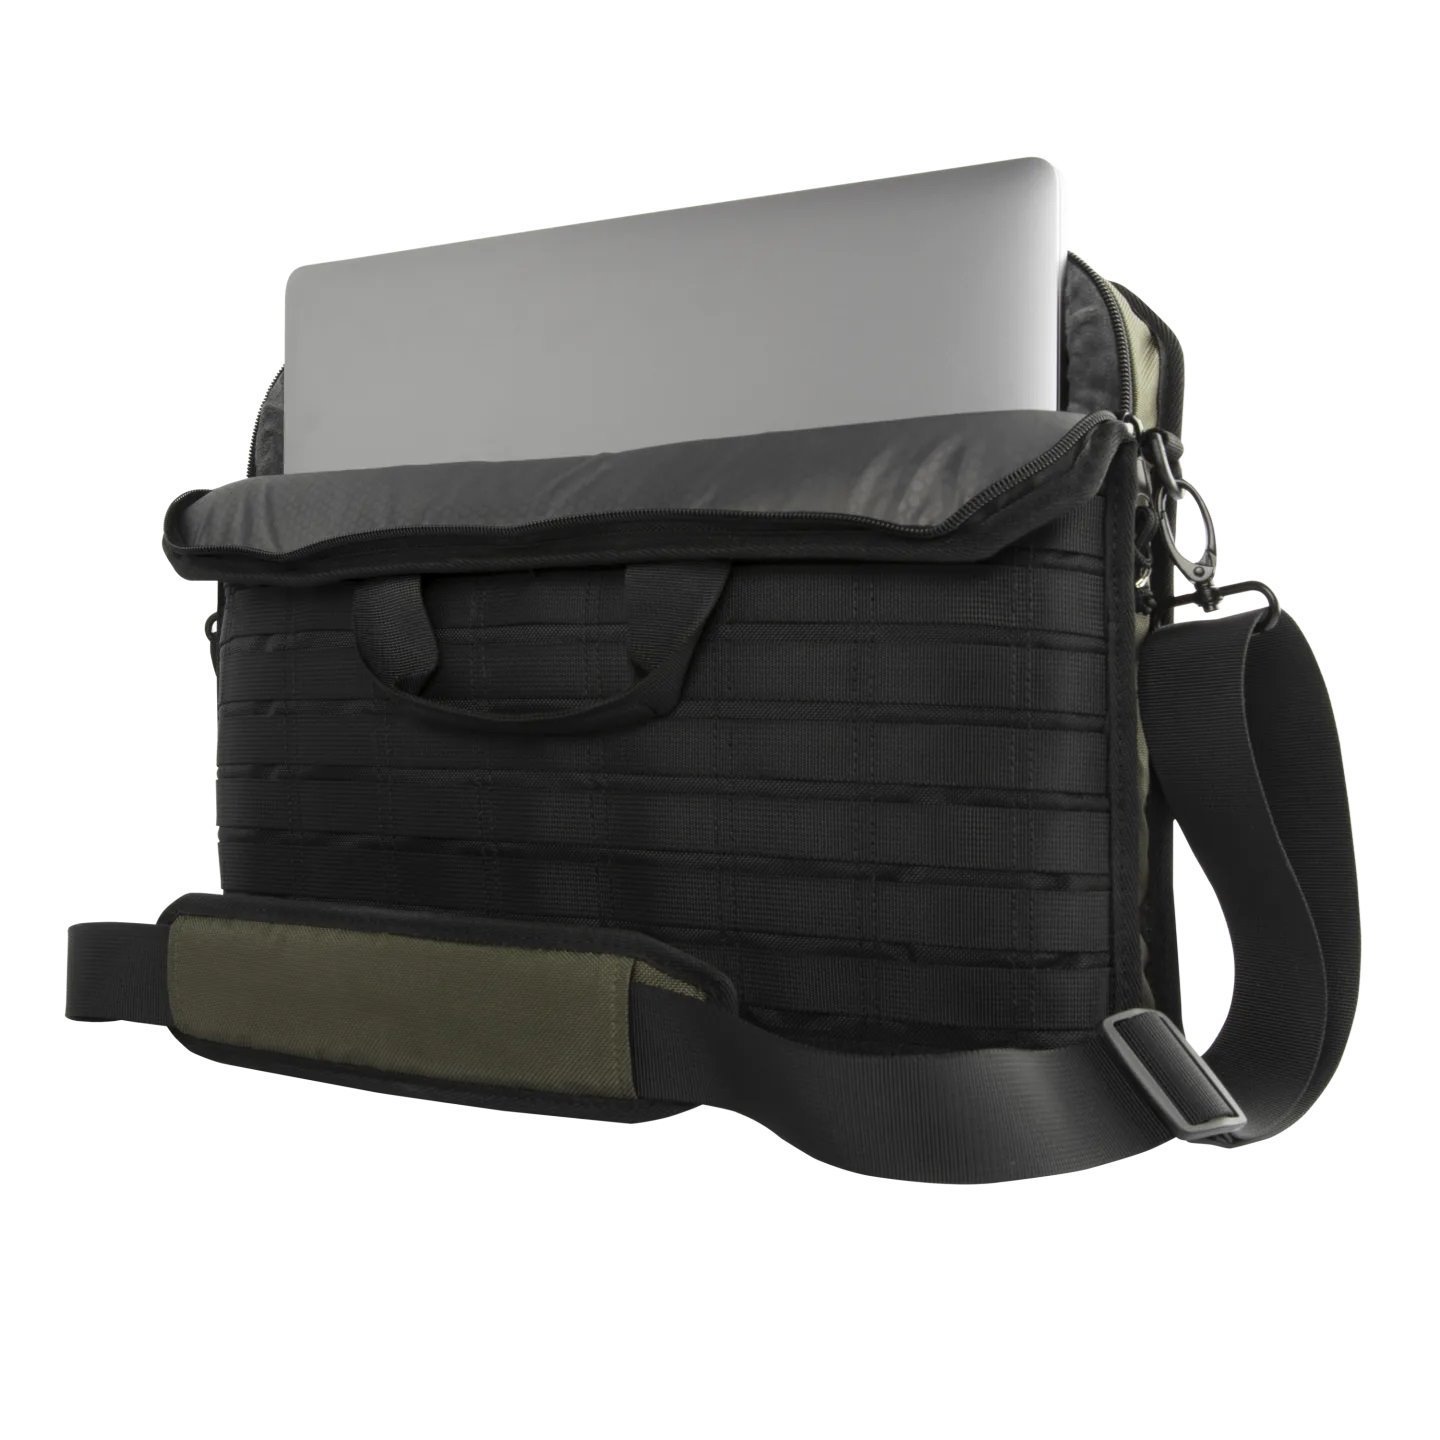 Uag Small Tactical Brief - Fits Up To 16 Devices - Olive (982610117272), Drop+ Military Standard, Detachable Shoulder Strap, Dual Layer Protection